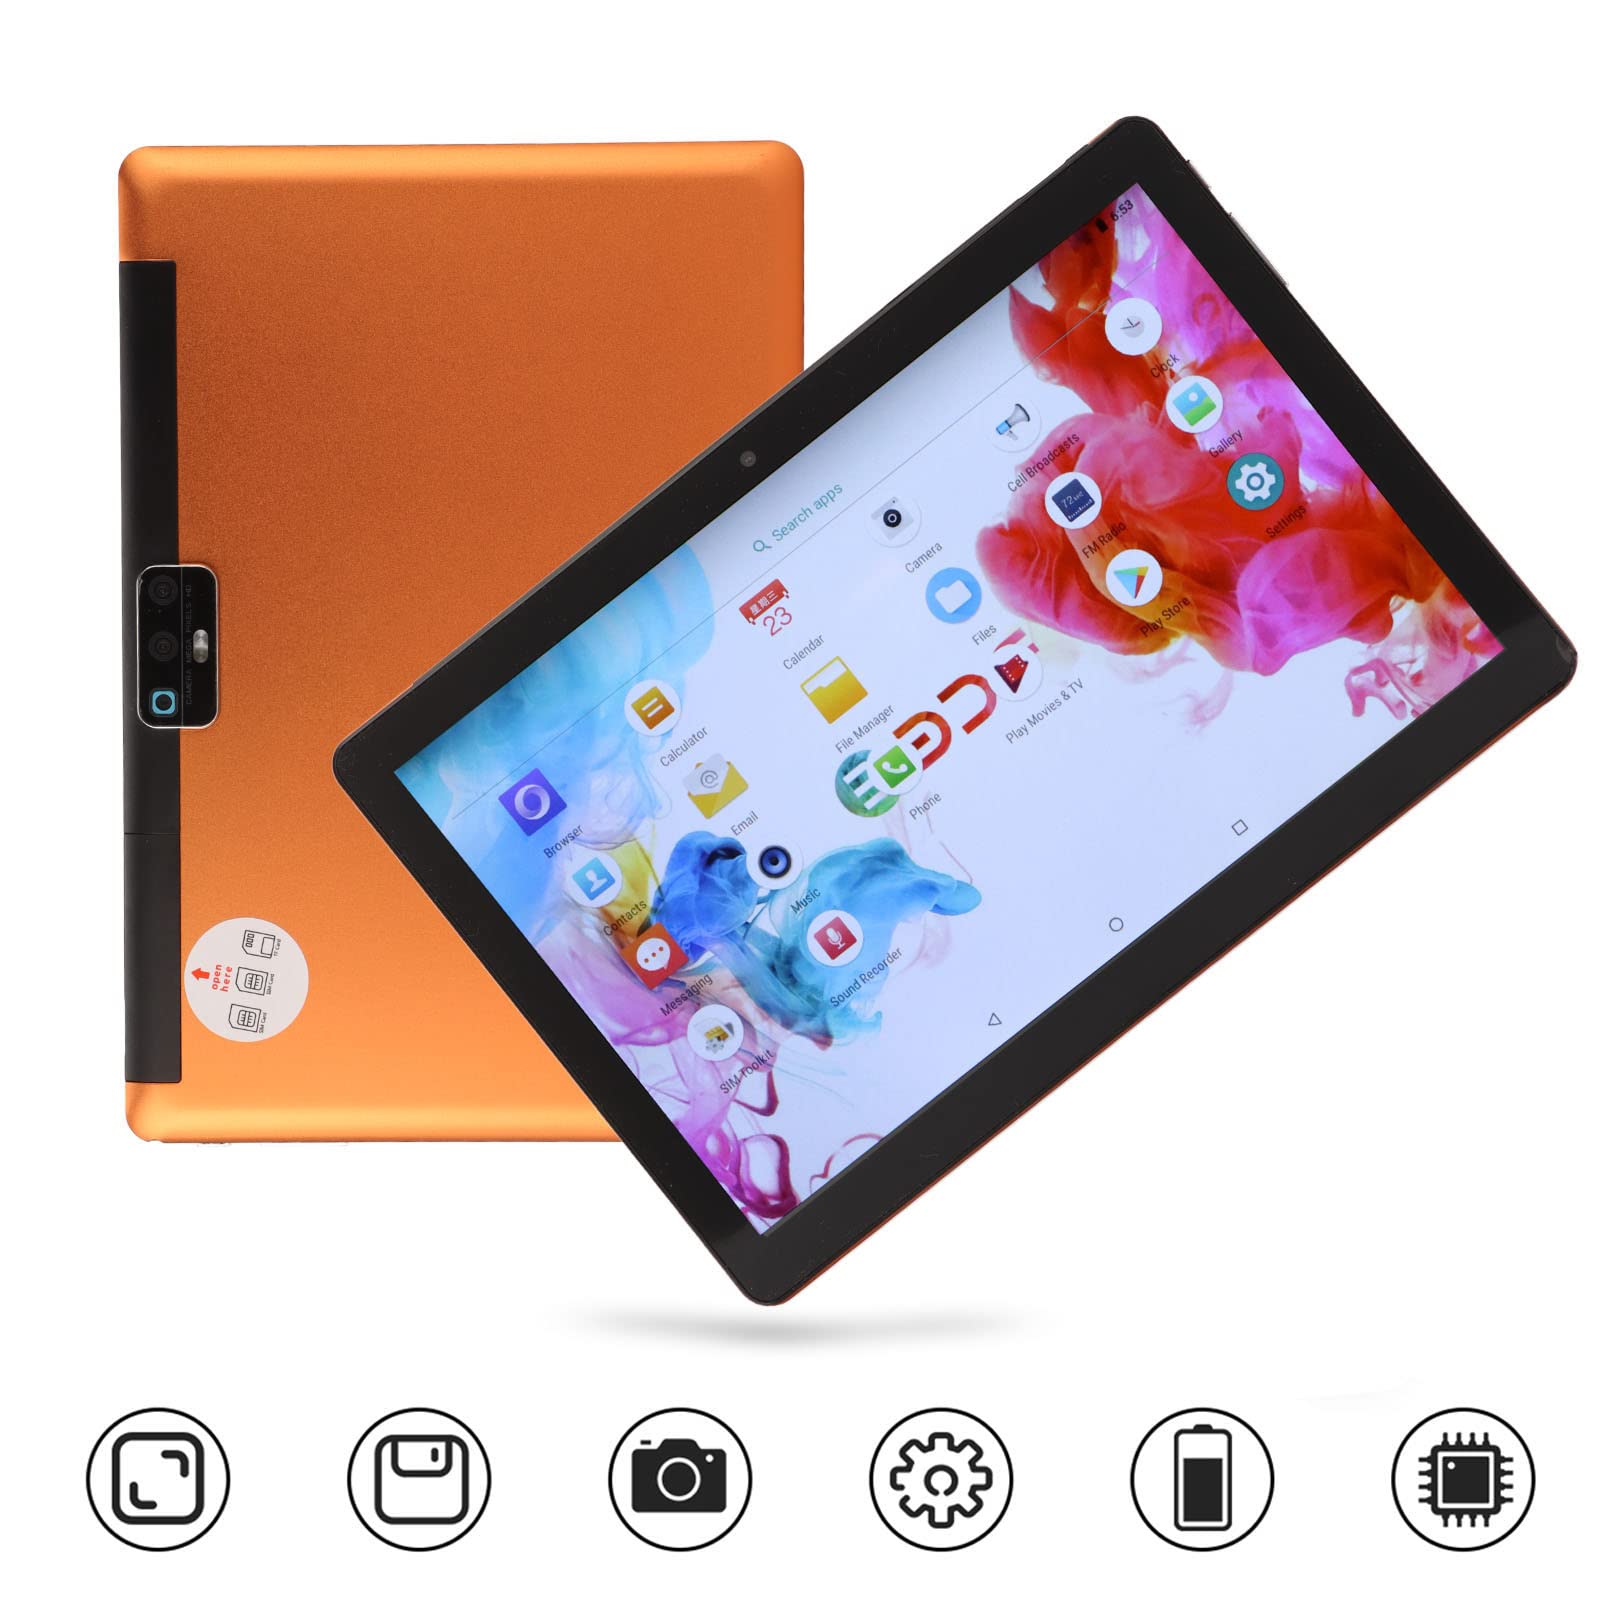 Septpenta 10.1 Inch HD Tablet, 4GB RAM 64GB ROM, 1280X800 IPS LCD, Dual SIM Dual Standby, 5MP Rear 2MP Front, 5000mAh 4G Orange Tablet for Android9.0(USA)